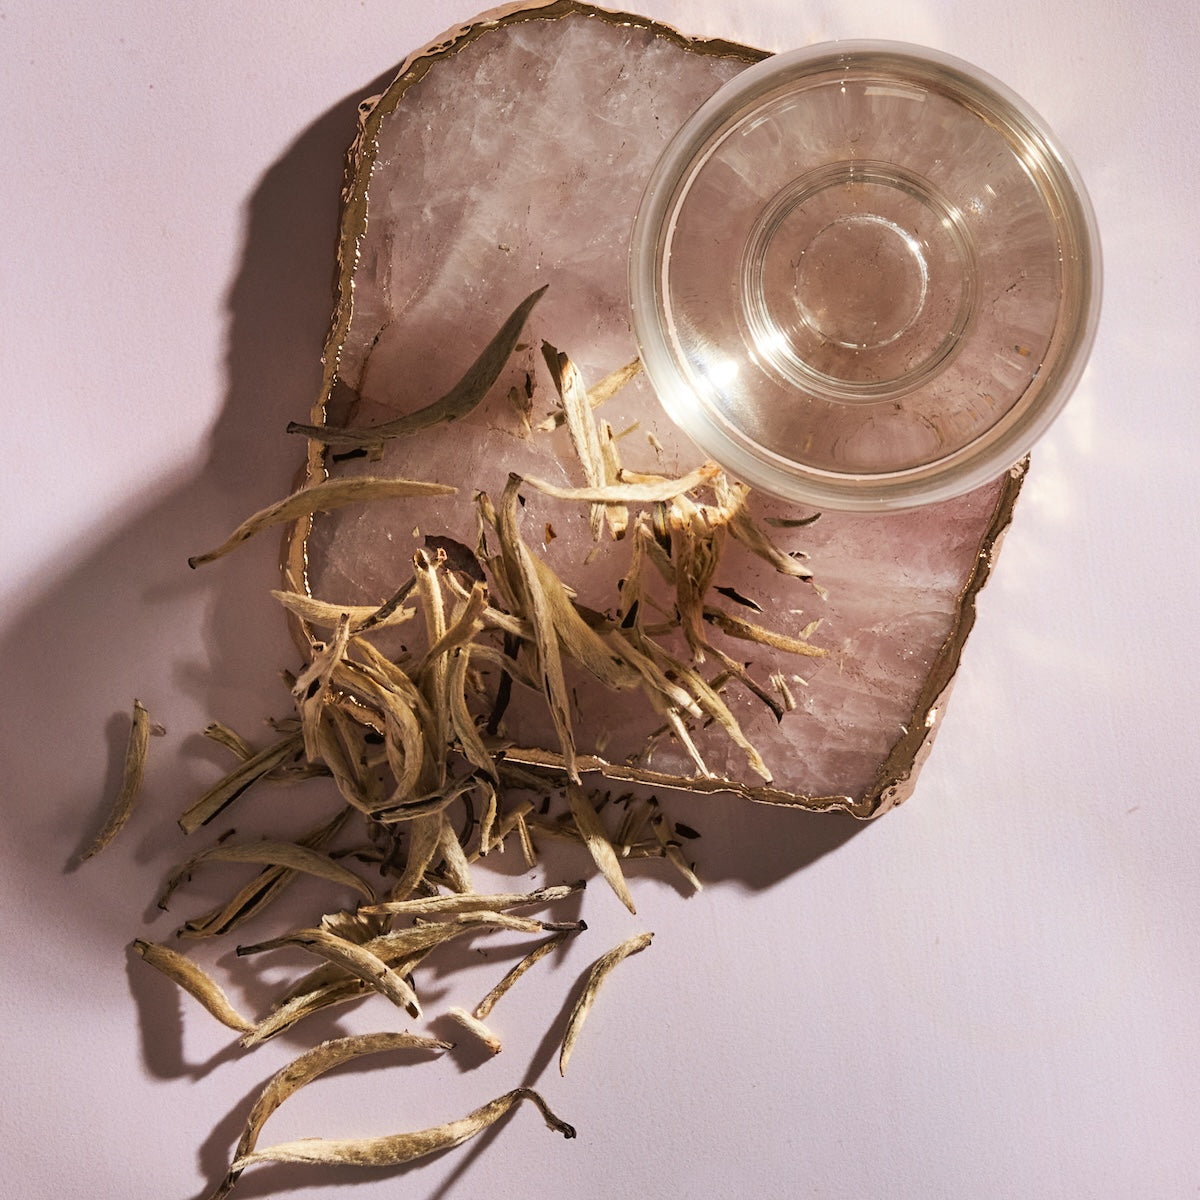 A glass cup of clear liquid sits on a polished pink stone slab with metallic gold edges. Dried Club Magic Hour Silver Moon White Tea leaves are scattered on the surface of the slab and the surrounding area. Shadows of the cup and tea leaves fall on the light pink background.